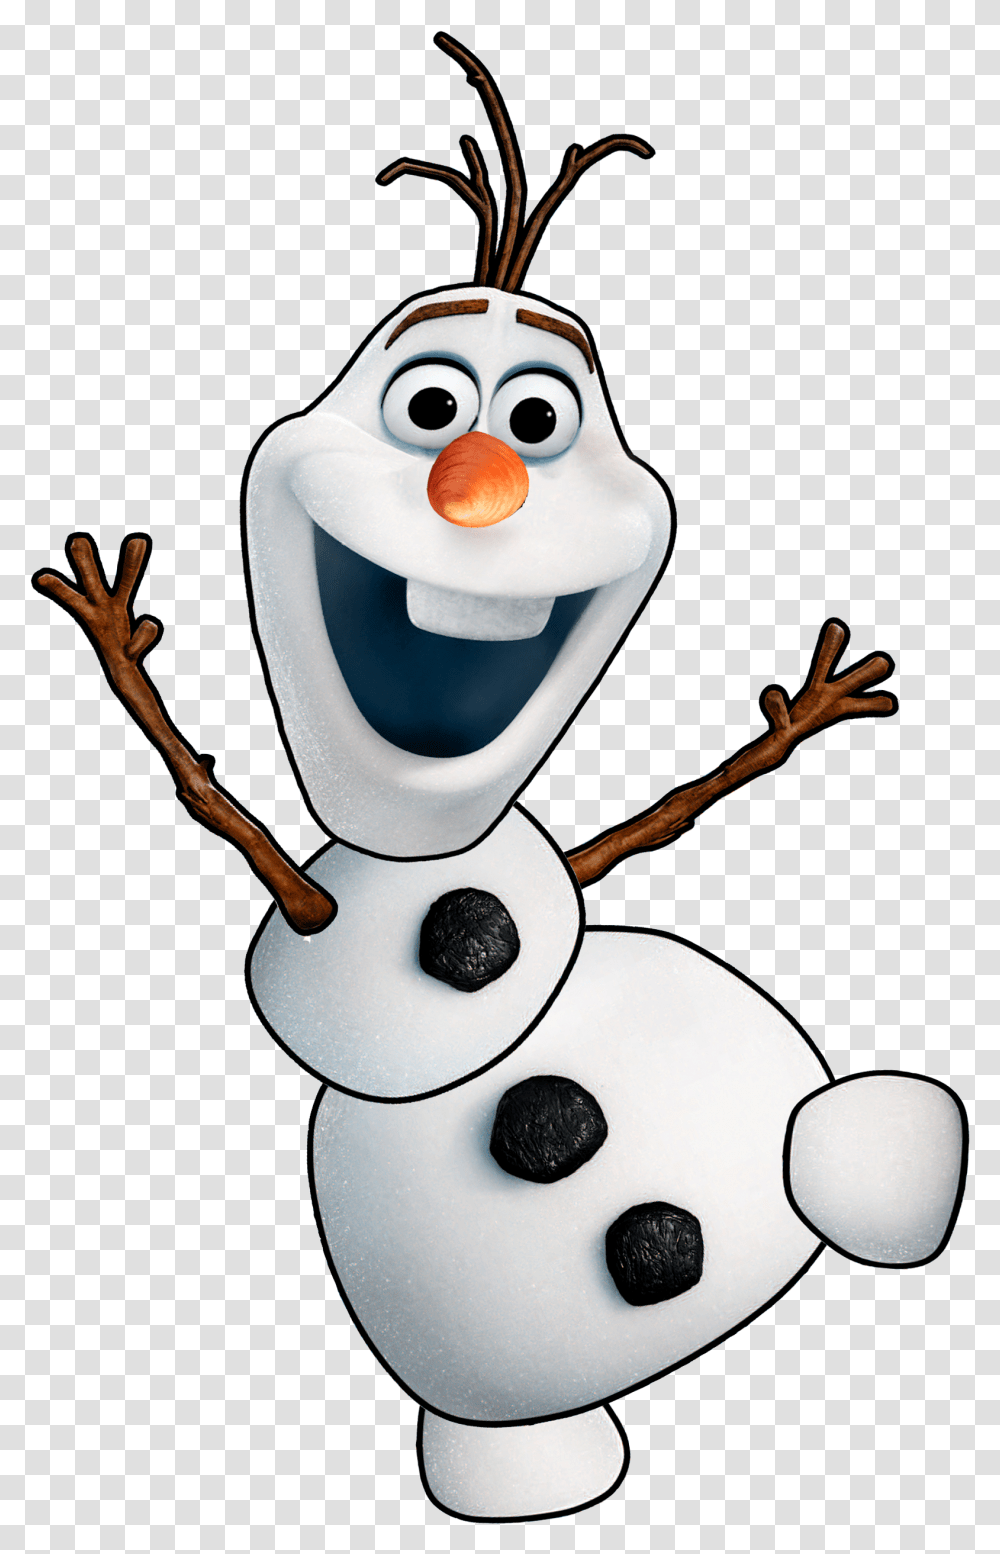 Olaf Frozen Summer Clip Art Car Tuning Free Clipart Frozen Olaf Printable, Snowman, Winter, Outdoors, Nature Transparent Png